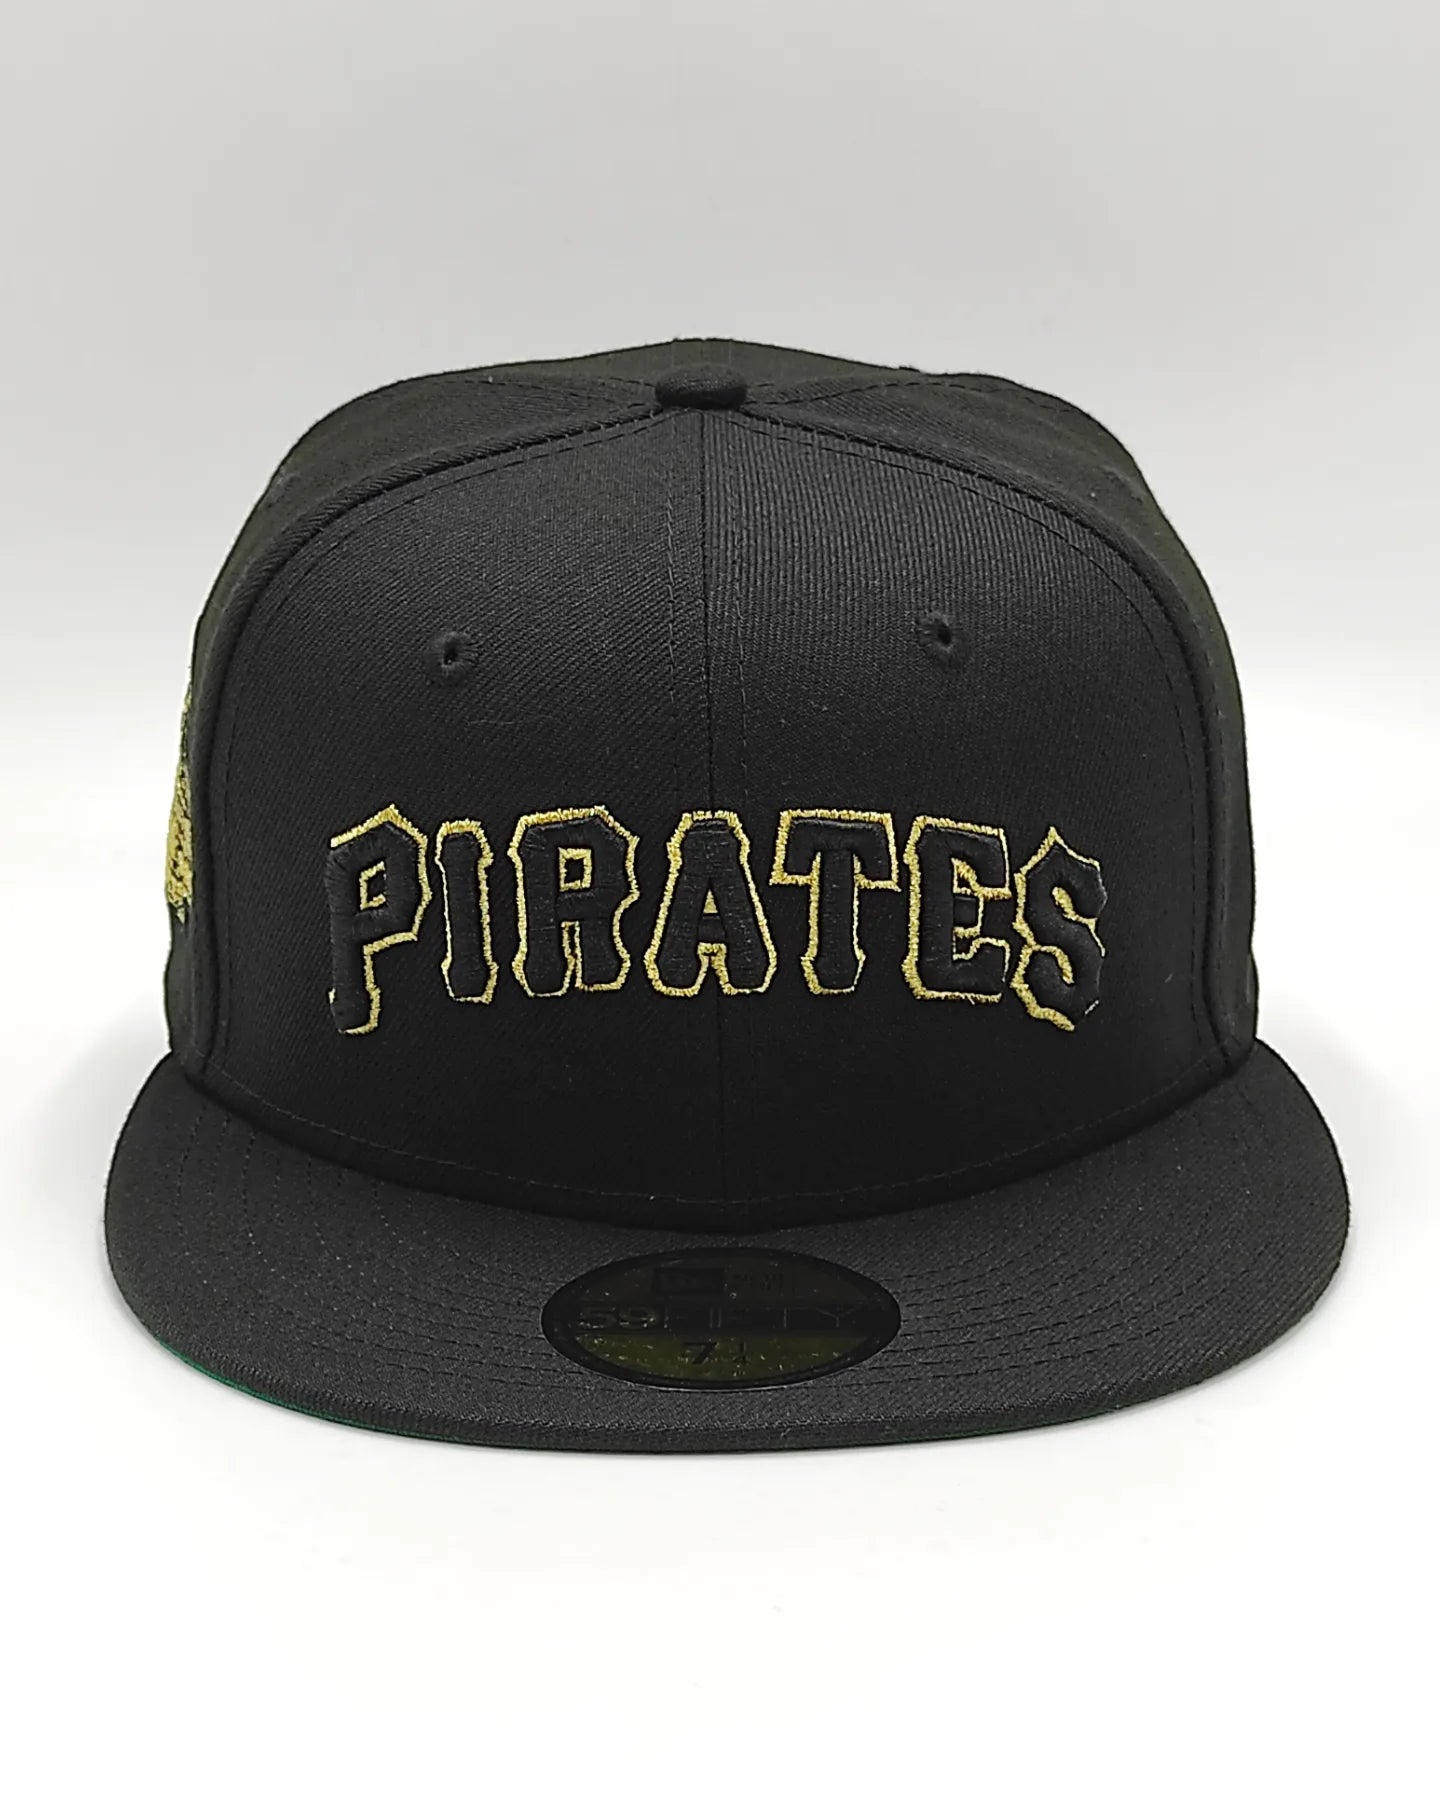 New Era Pittsburgh Pirates world series 1971 black gold throwback edition 59fifty fitted hat